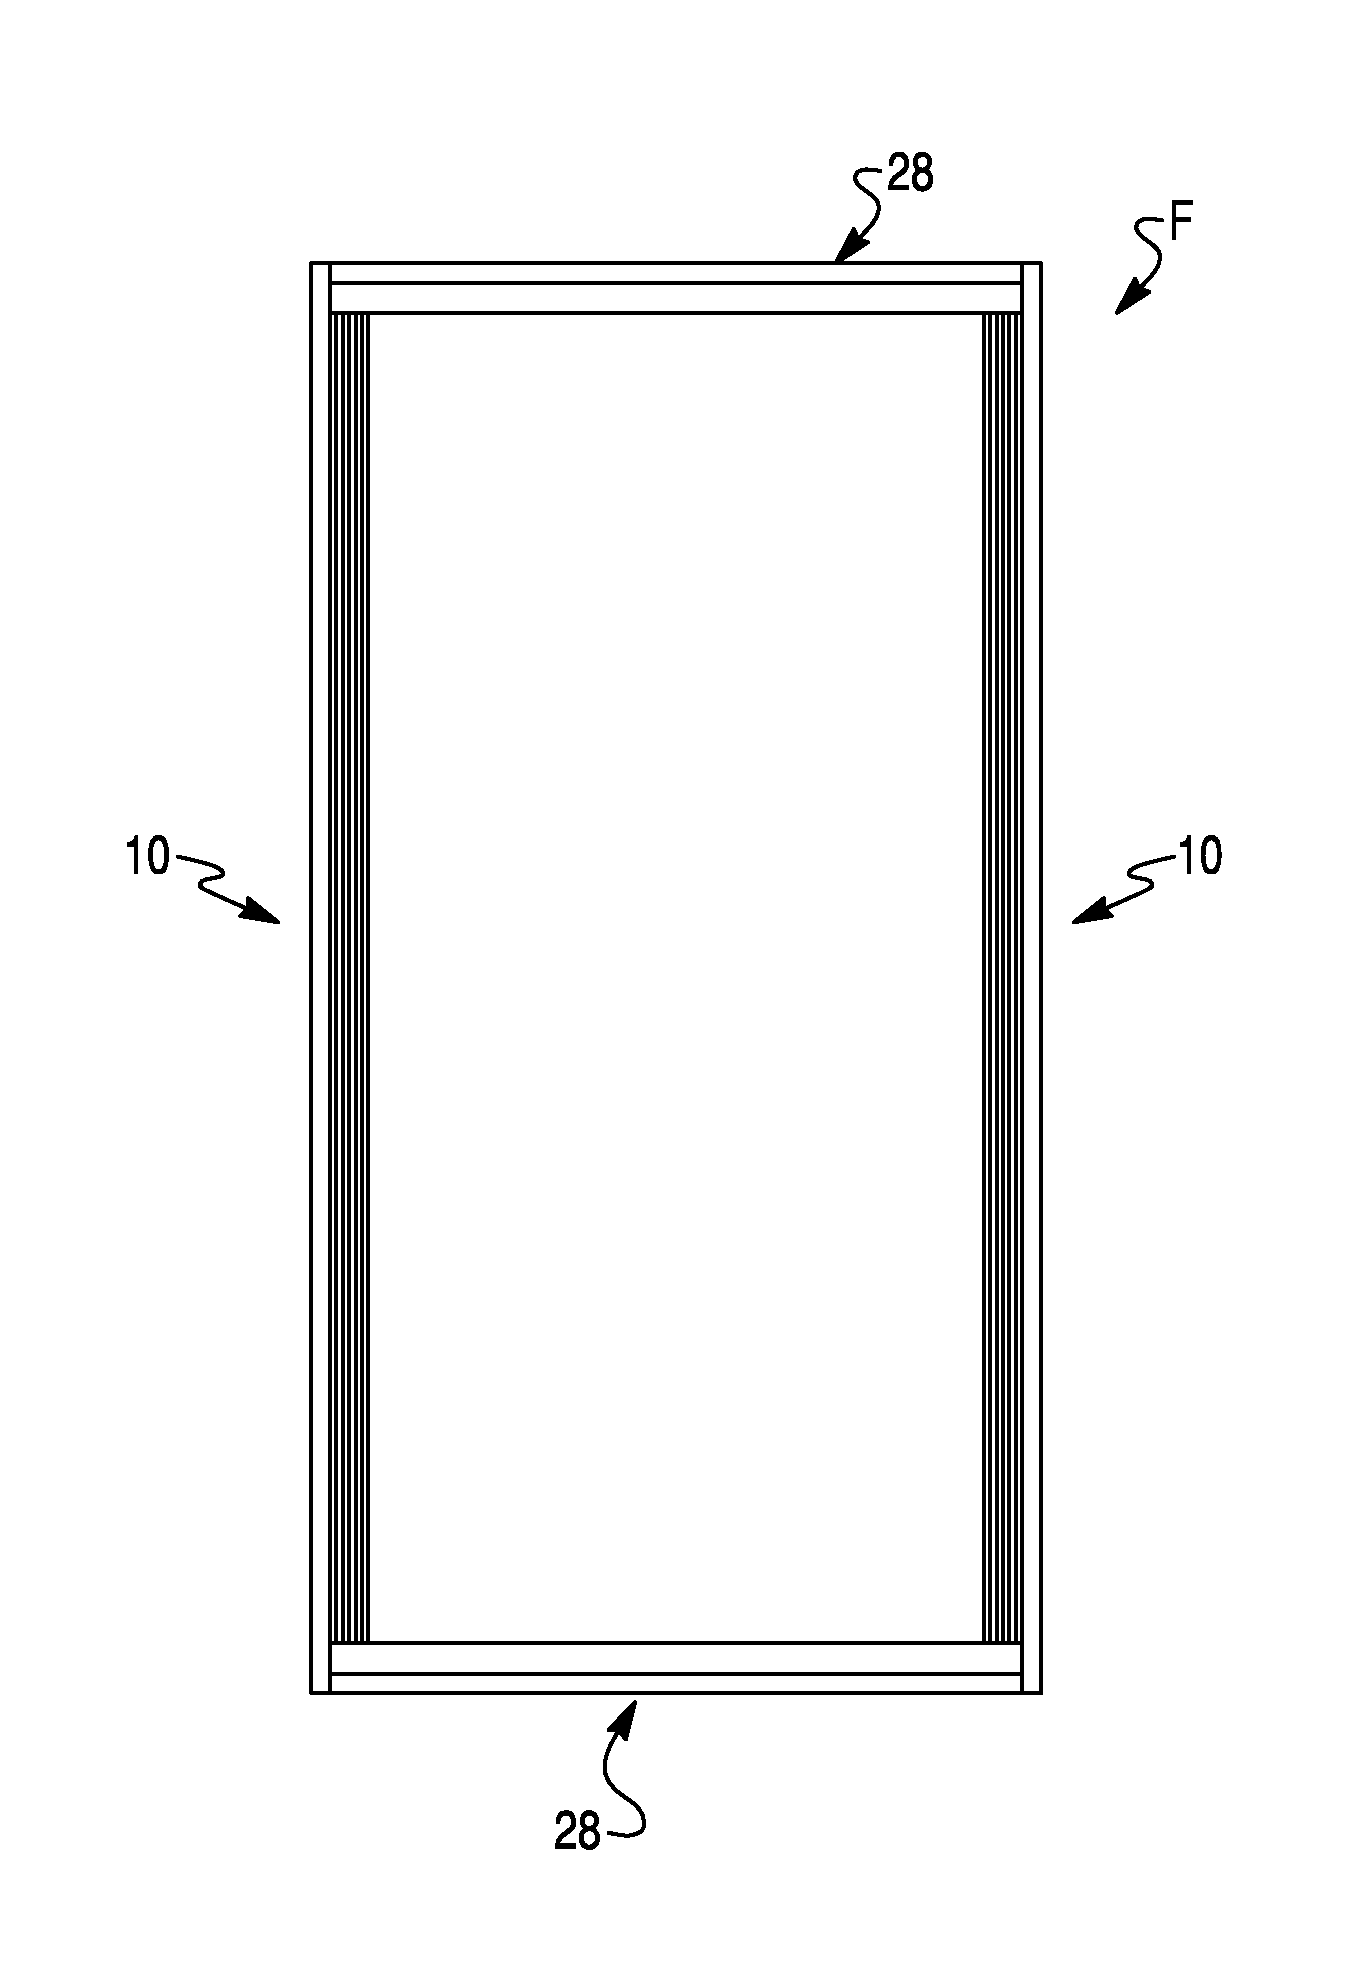 Composite capped stile, door and method